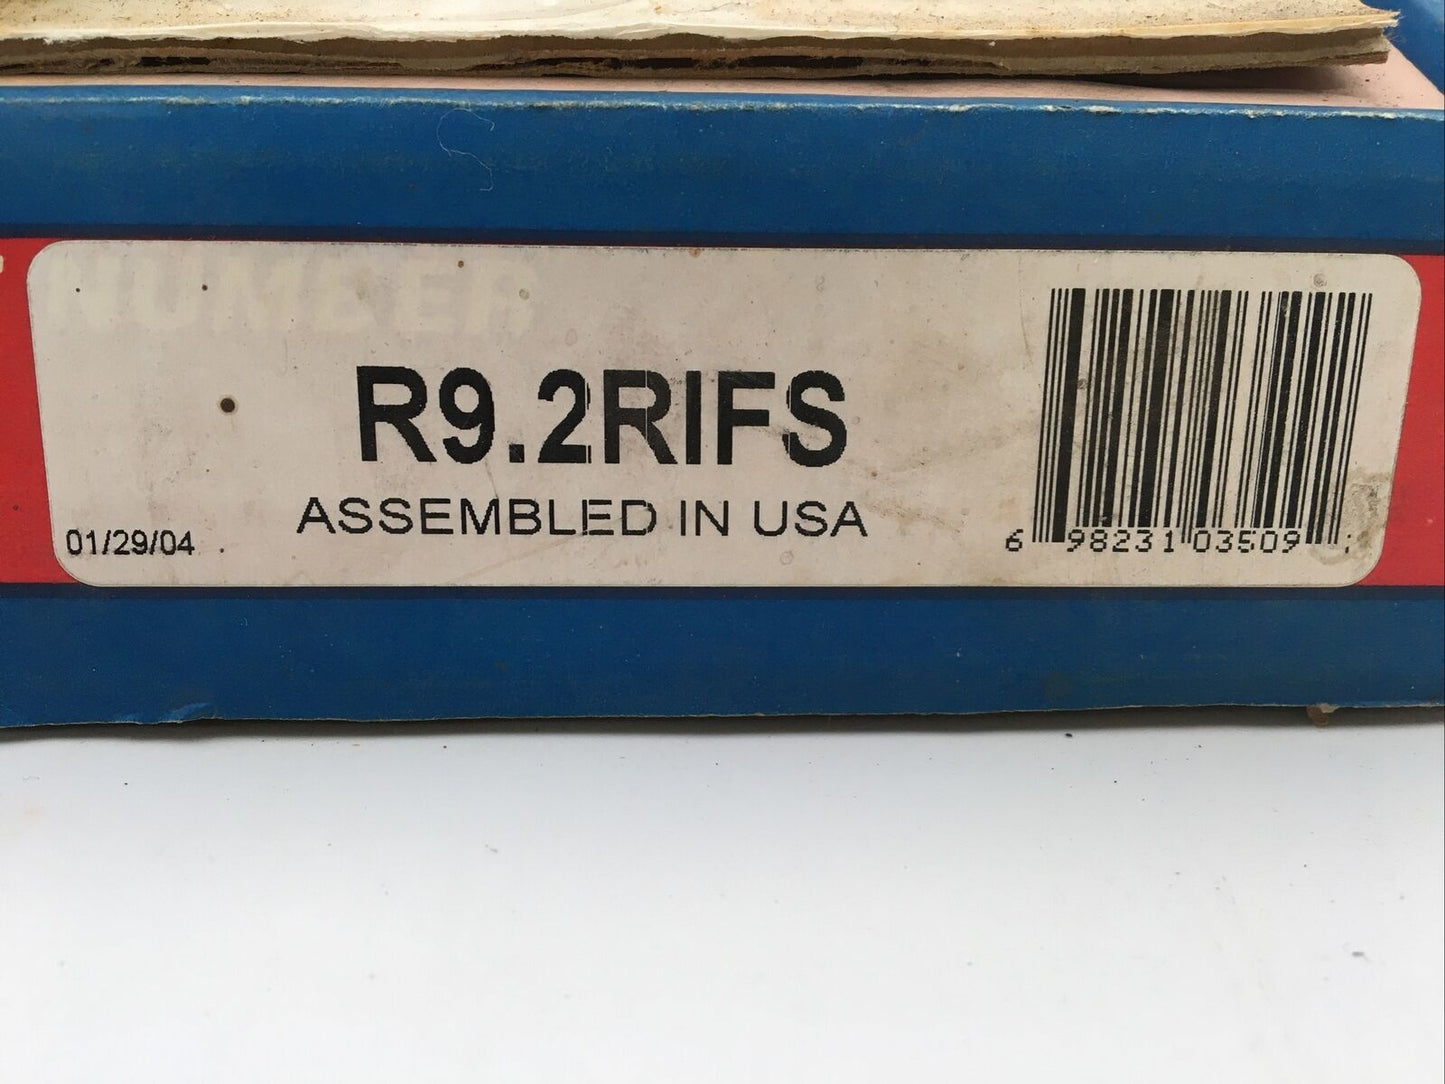 Motive Gear Differential Bearing Kit R9.2RIFS-OPEN - May Have Missing Pieces